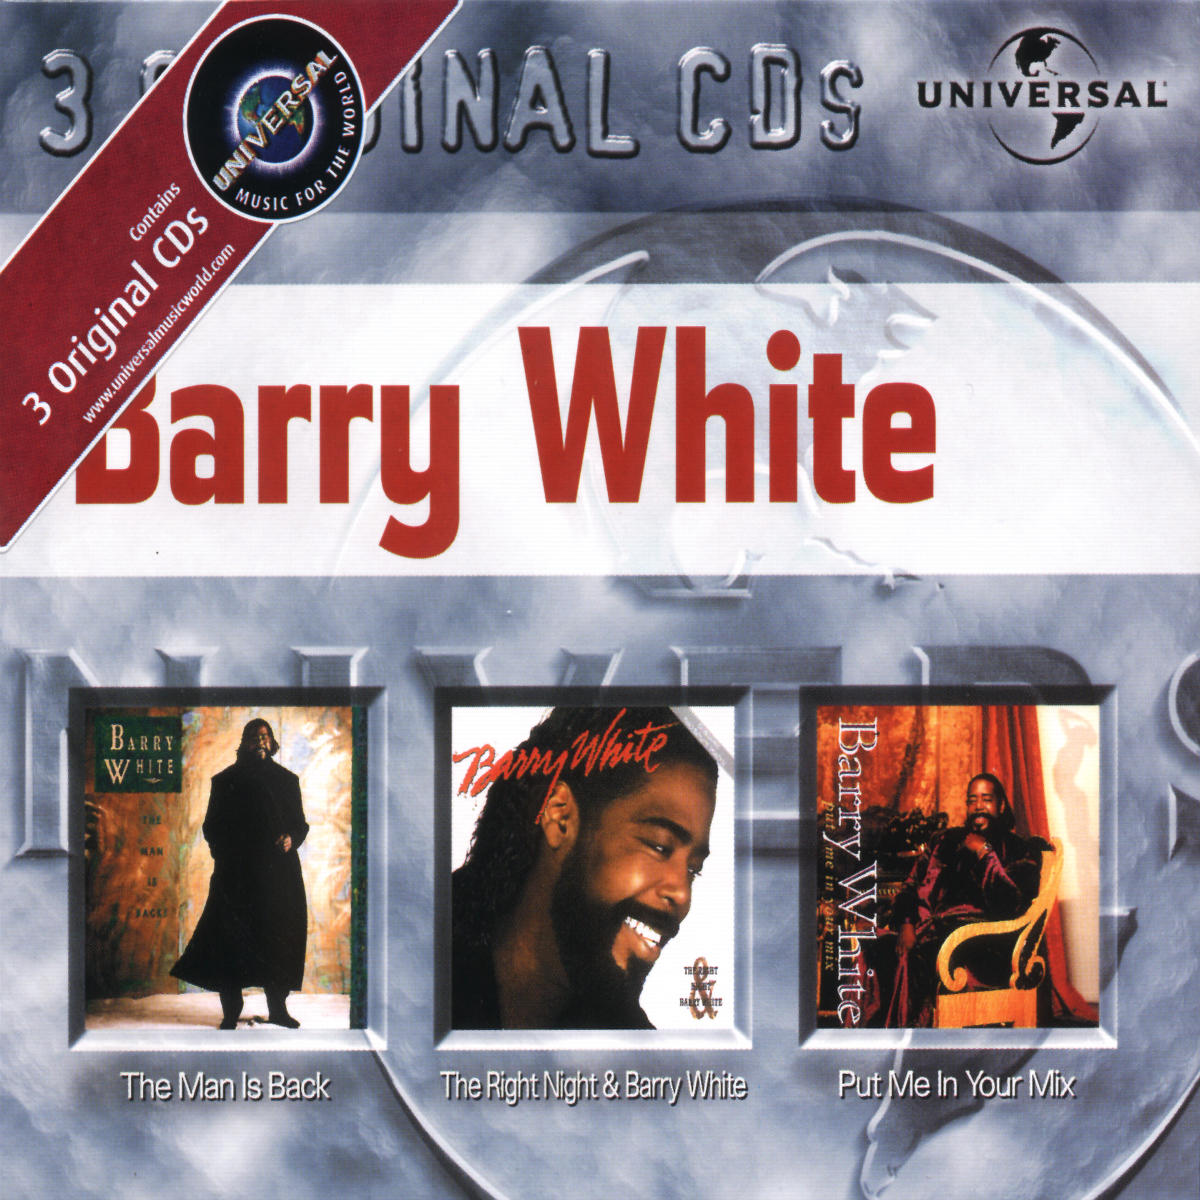 Barry White the Ultimate collection. Barry White the man is back. Barry White - 1987 - the right Night & Barry White. Barry White - 1991 - put me in your Mix.